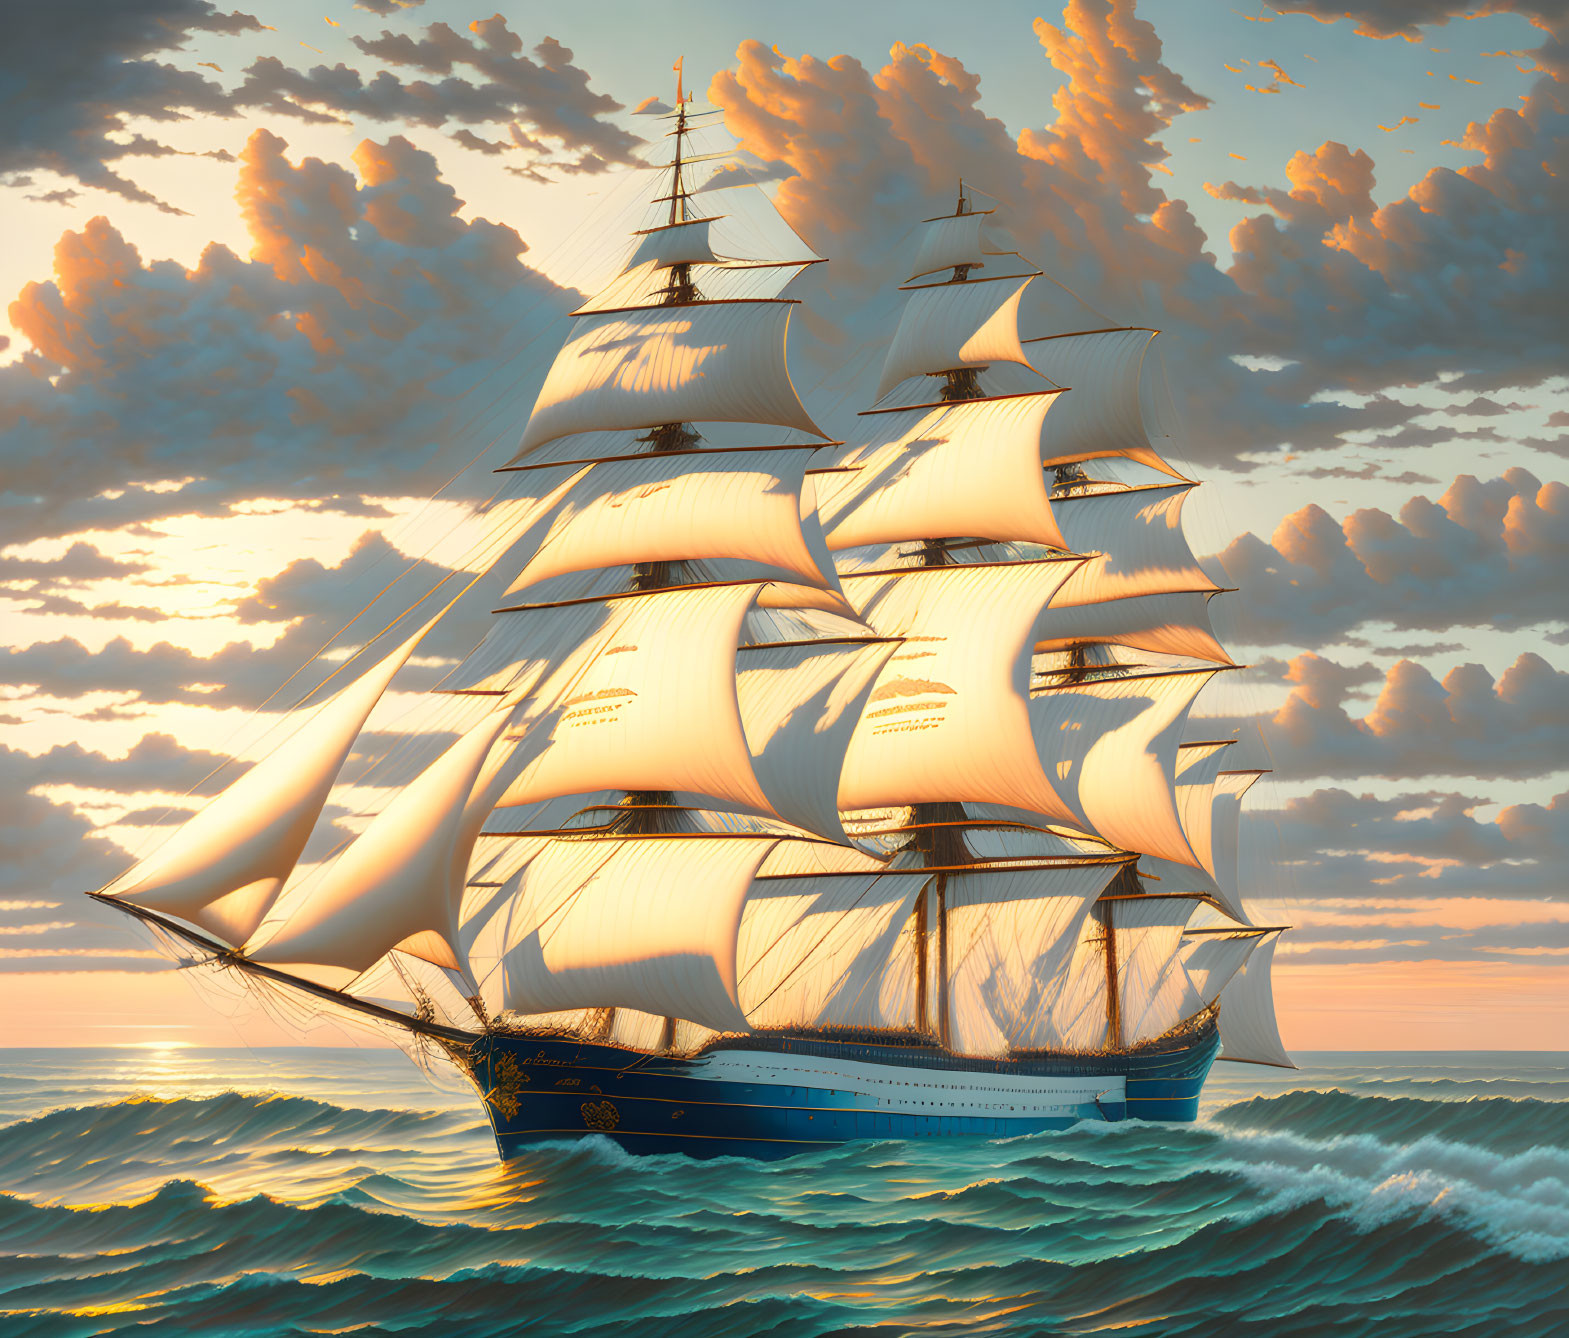 Tall ship with white sails at sunset on calm seas